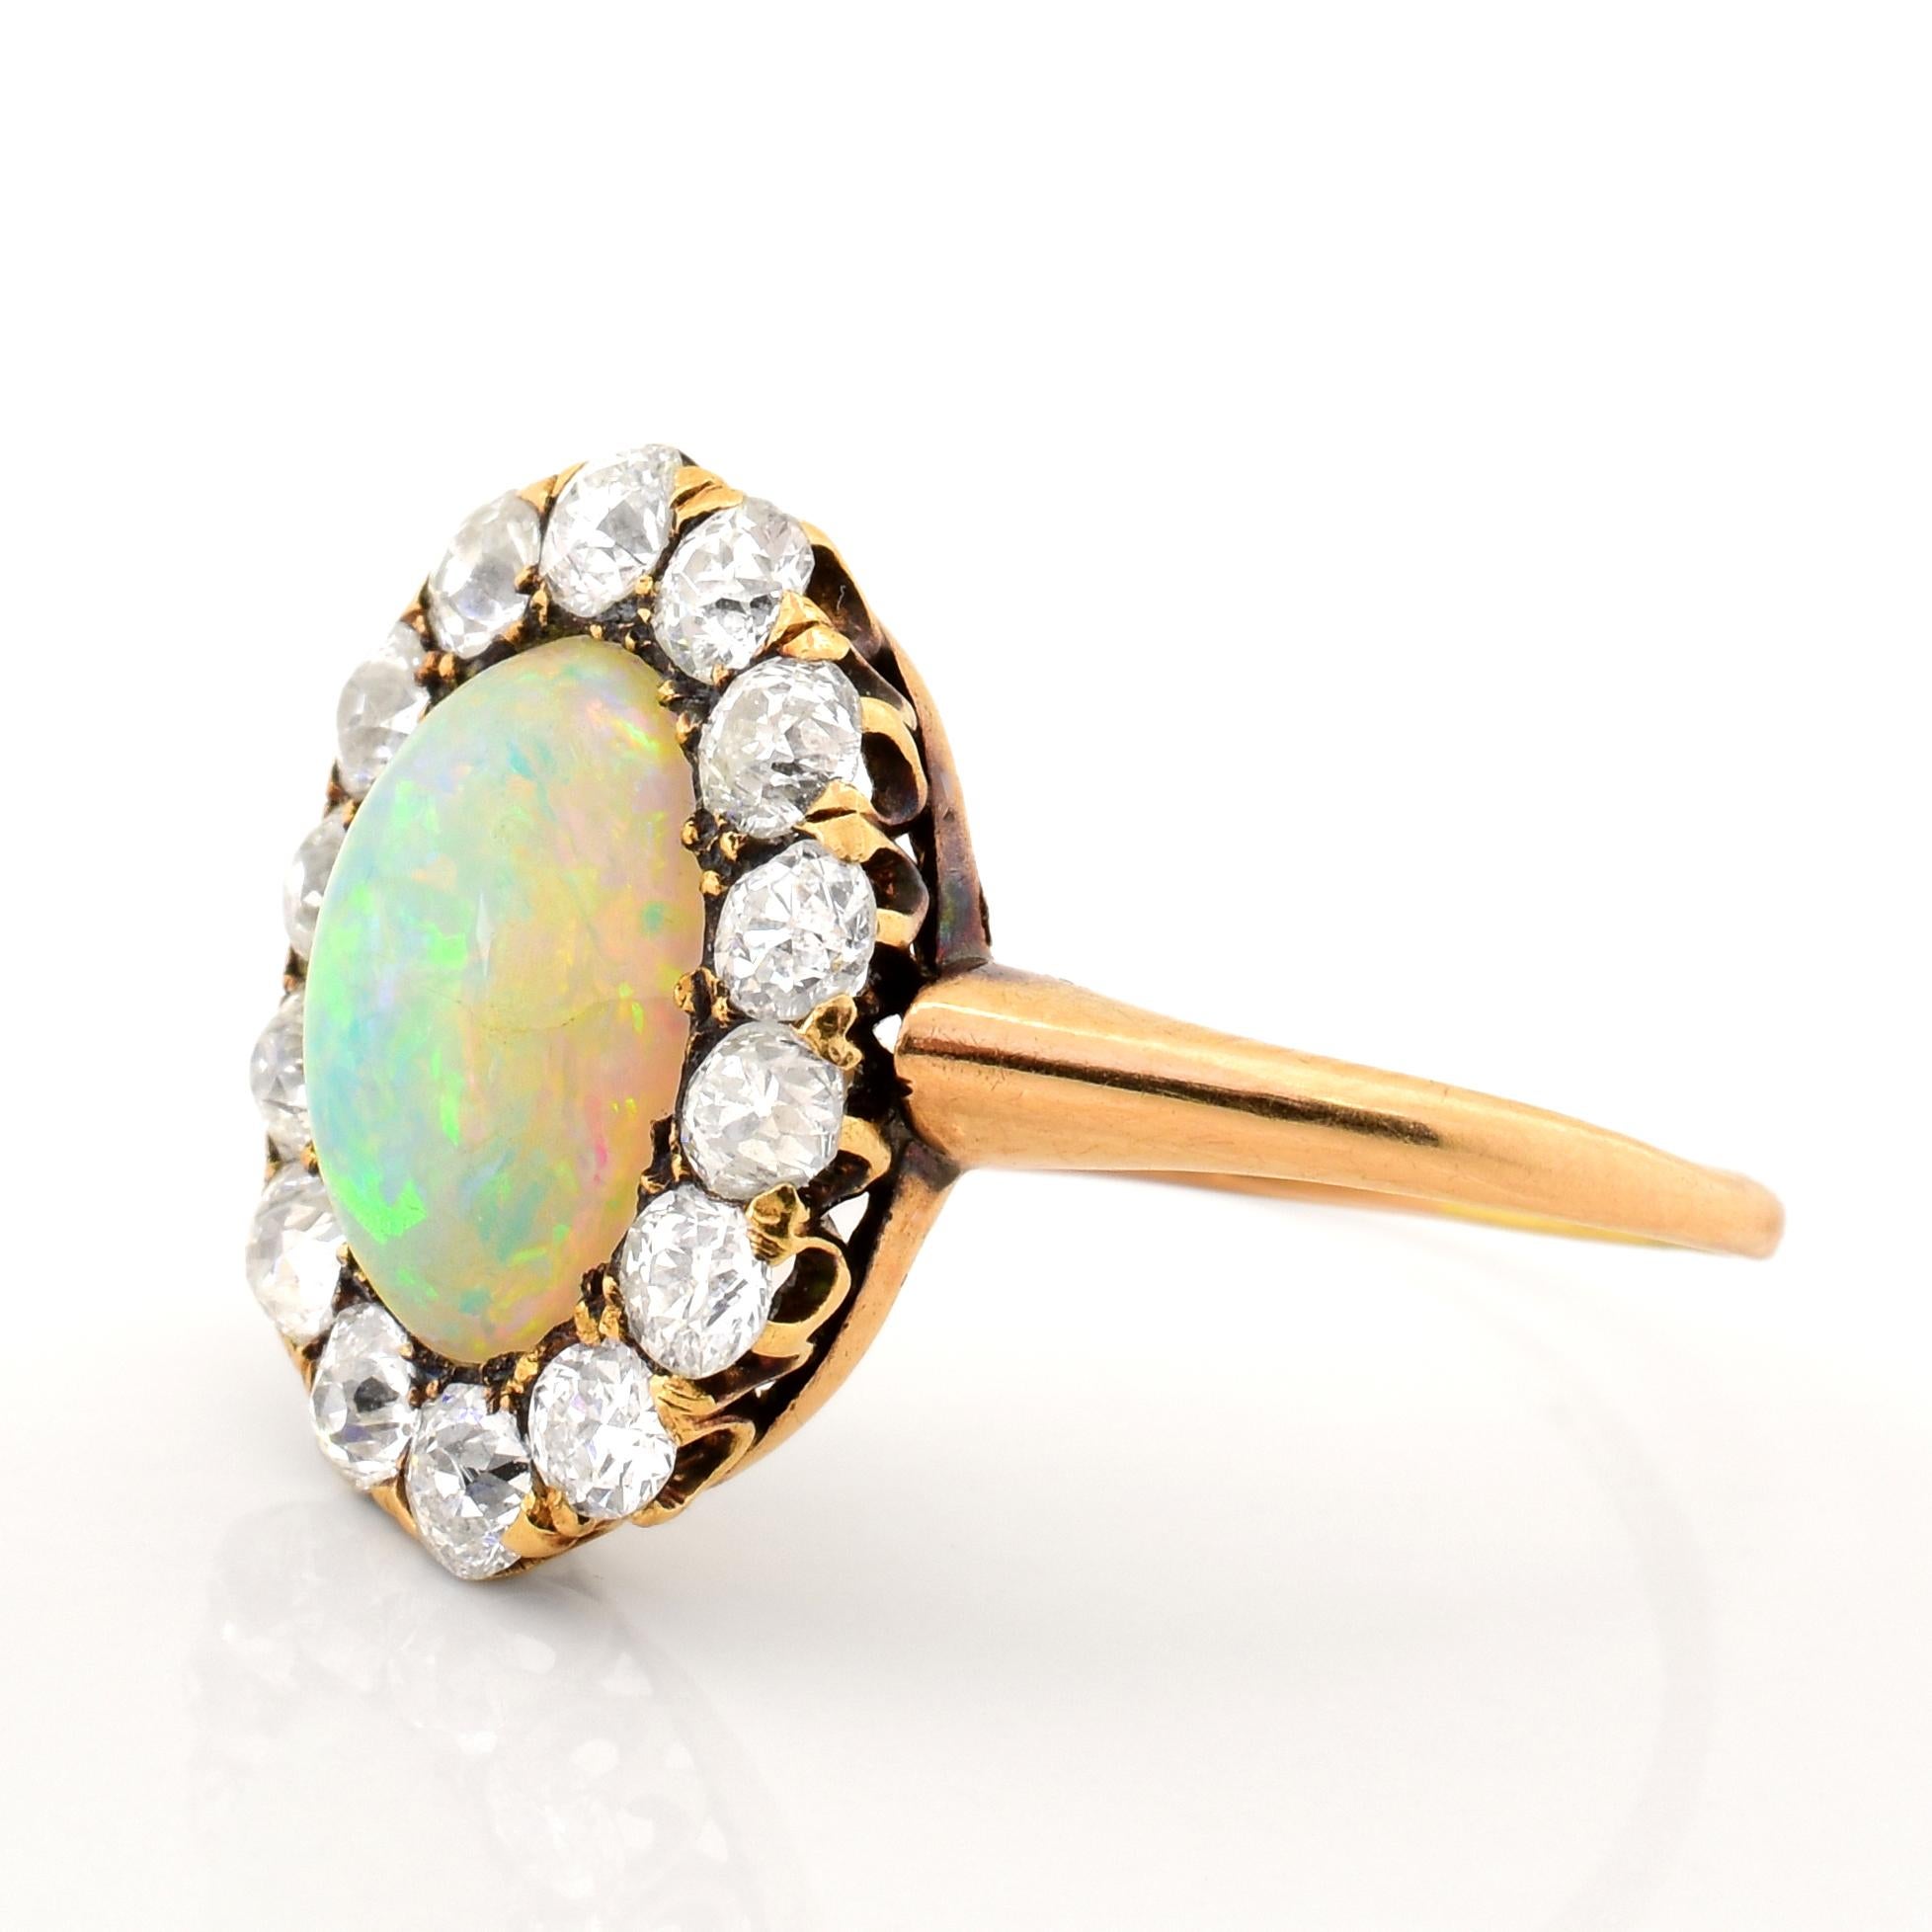 A Victorian Era ring featuring an oval cut Opal center stone. The Opal is white in color, with vibrant yellow, green, and orange marbled throughout the stone. The Opal is surrounded by rose cut diamonds. The yellow gold has a beautiful patina over